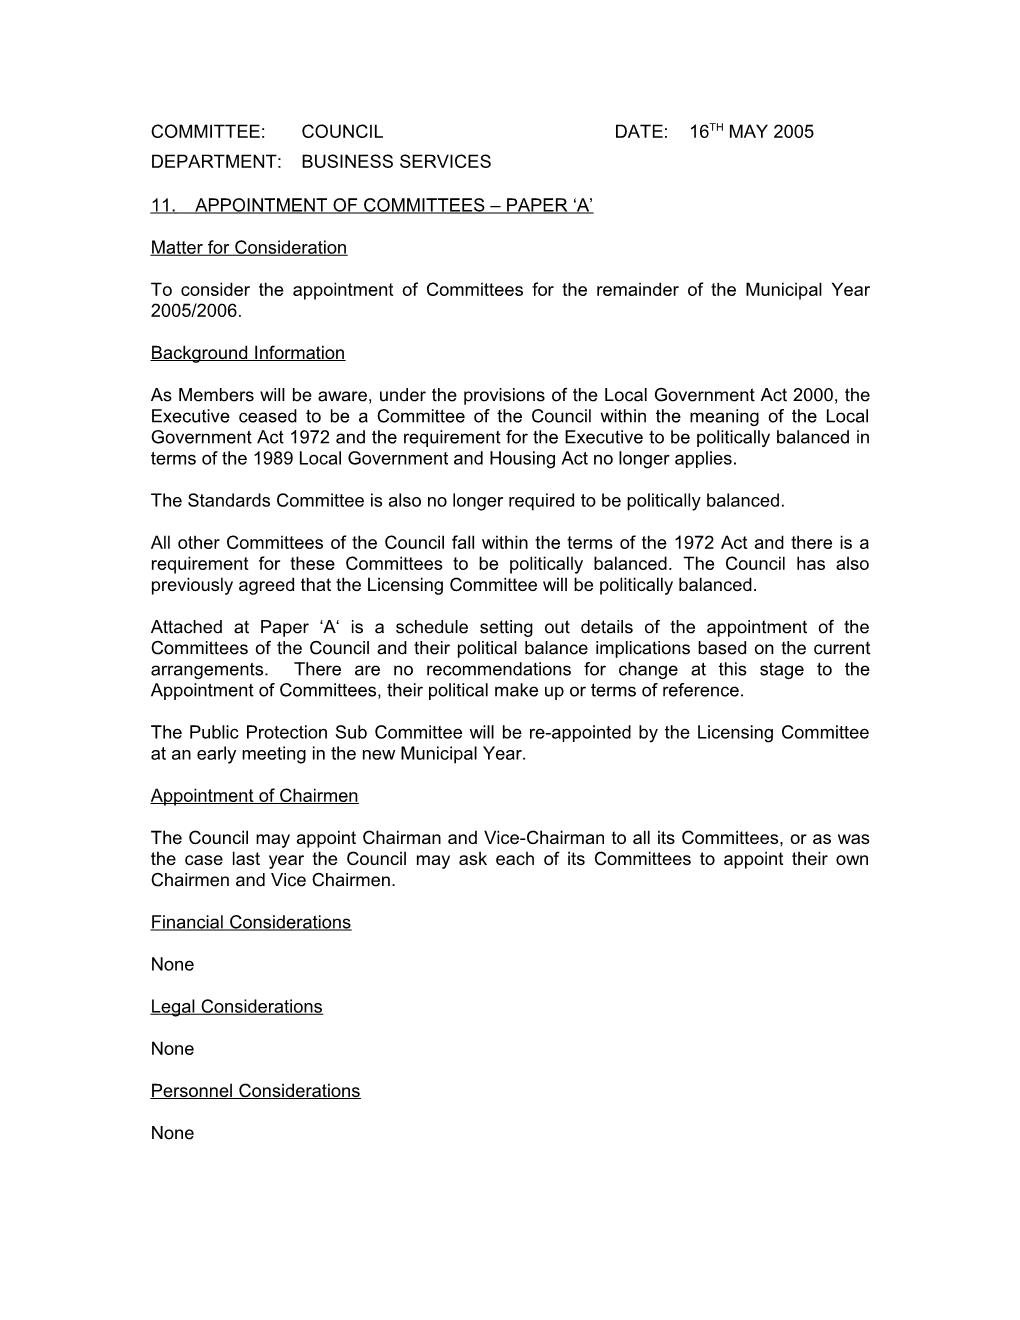 To Consider the Appointment of Committees for the Remainder of the Municipal Year 2005/2006